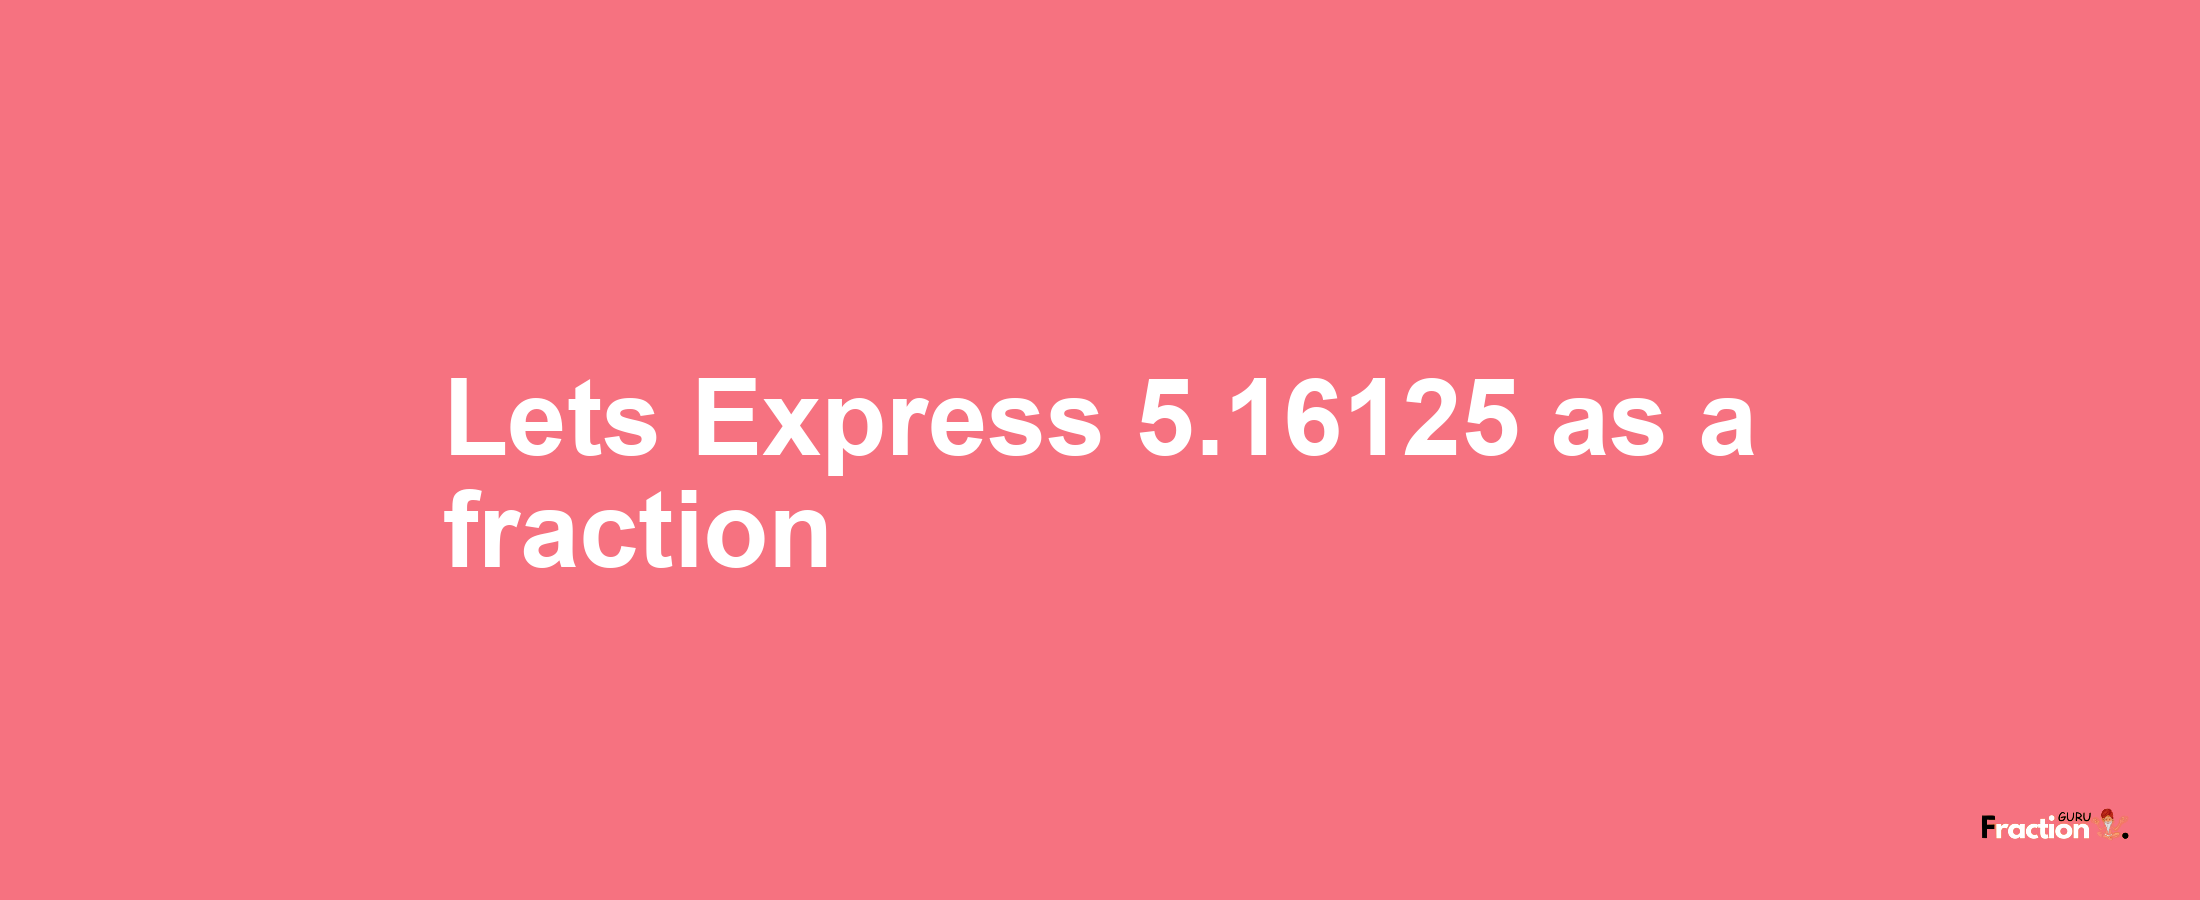 Lets Express 5.16125 as afraction